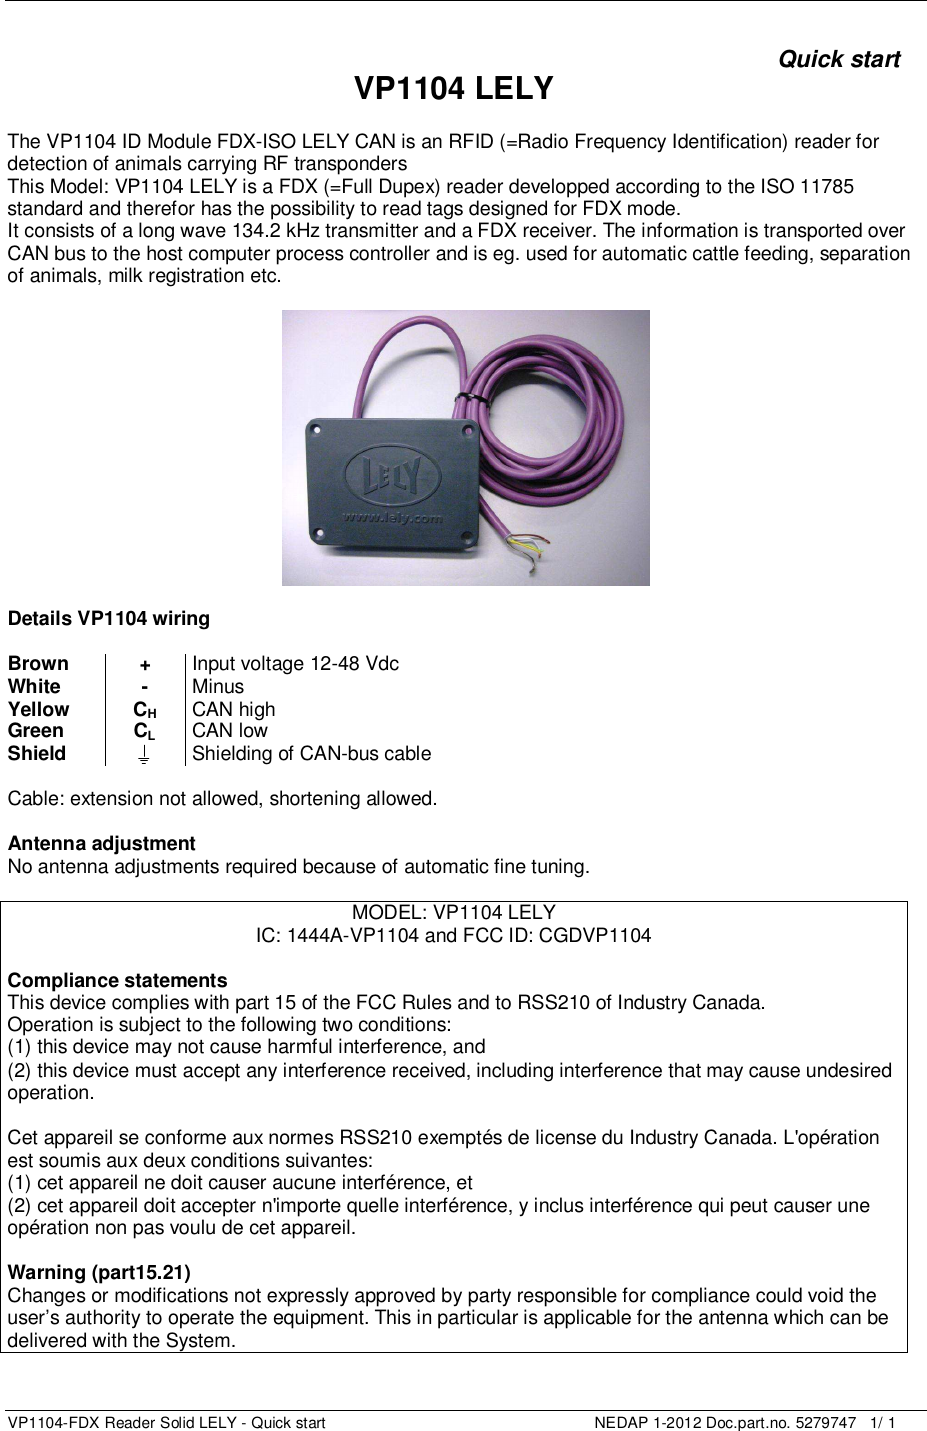   VP1104-FDX Reader Solid LELY - Quick start    NEDAP 1-2012 Doc.part.no. 5279747   1/ 1      Quick start VP1104 LELY  The VP1104 ID Module FDX-ISO LELY CAN is an RFID (=Radio Frequency Identification) reader for detection of animals carrying RF transponders  This Model: VP1104 LELY is a FDX (=Full Dupex) reader developped according to the ISO 11785 standard and therefor has the possibility to read tags designed for FDX mode.  It consists of a long wave 134.2 kHz transmitter and a FDX receiver. The information is transported over CAN bus to the host computer process controller and is eg. used for automatic cattle feeding, separation of animals, milk registration etc.    Details VP1104 wiring  Brown + Input voltage 12-48 Vdc White - Minus Yellow CH CAN high Green CL CAN low Shield  Shielding of CAN-bus cable  Cable: extension not allowed, shortening allowed.  Antenna adjustment No antenna adjustments required because of automatic fine tuning.  MODEL: VP1104 LELY IC: 1444A-VP1104 and FCC ID: CGDVP1104  Compliance statements This device complies with part 15 of the FCC Rules and to RSS210 of Industry Canada. Operation is subject to the following two conditions: (1) this device may not cause harmful interference, and (2) this device must accept any interference received, including interference that may cause undesired operation.  Cet appareil se conforme aux normes RSS210 exemptés de license du Industry Canada. L&apos;opération est soumis aux deux conditions suivantes: (1) cet appareil ne doit causer aucune interférence, et  (2) cet appareil doit accepter n&apos;importe quelle interférence, y inclus interférence qui peut causer une opération non pas voulu de cet appareil.  Warning (part15.21) Changes or modifications not expressly approved by party responsible for compliance could void the user’s authority to operate the equipment. This in particular is applicable for the antenna which can be delivered with the System.   